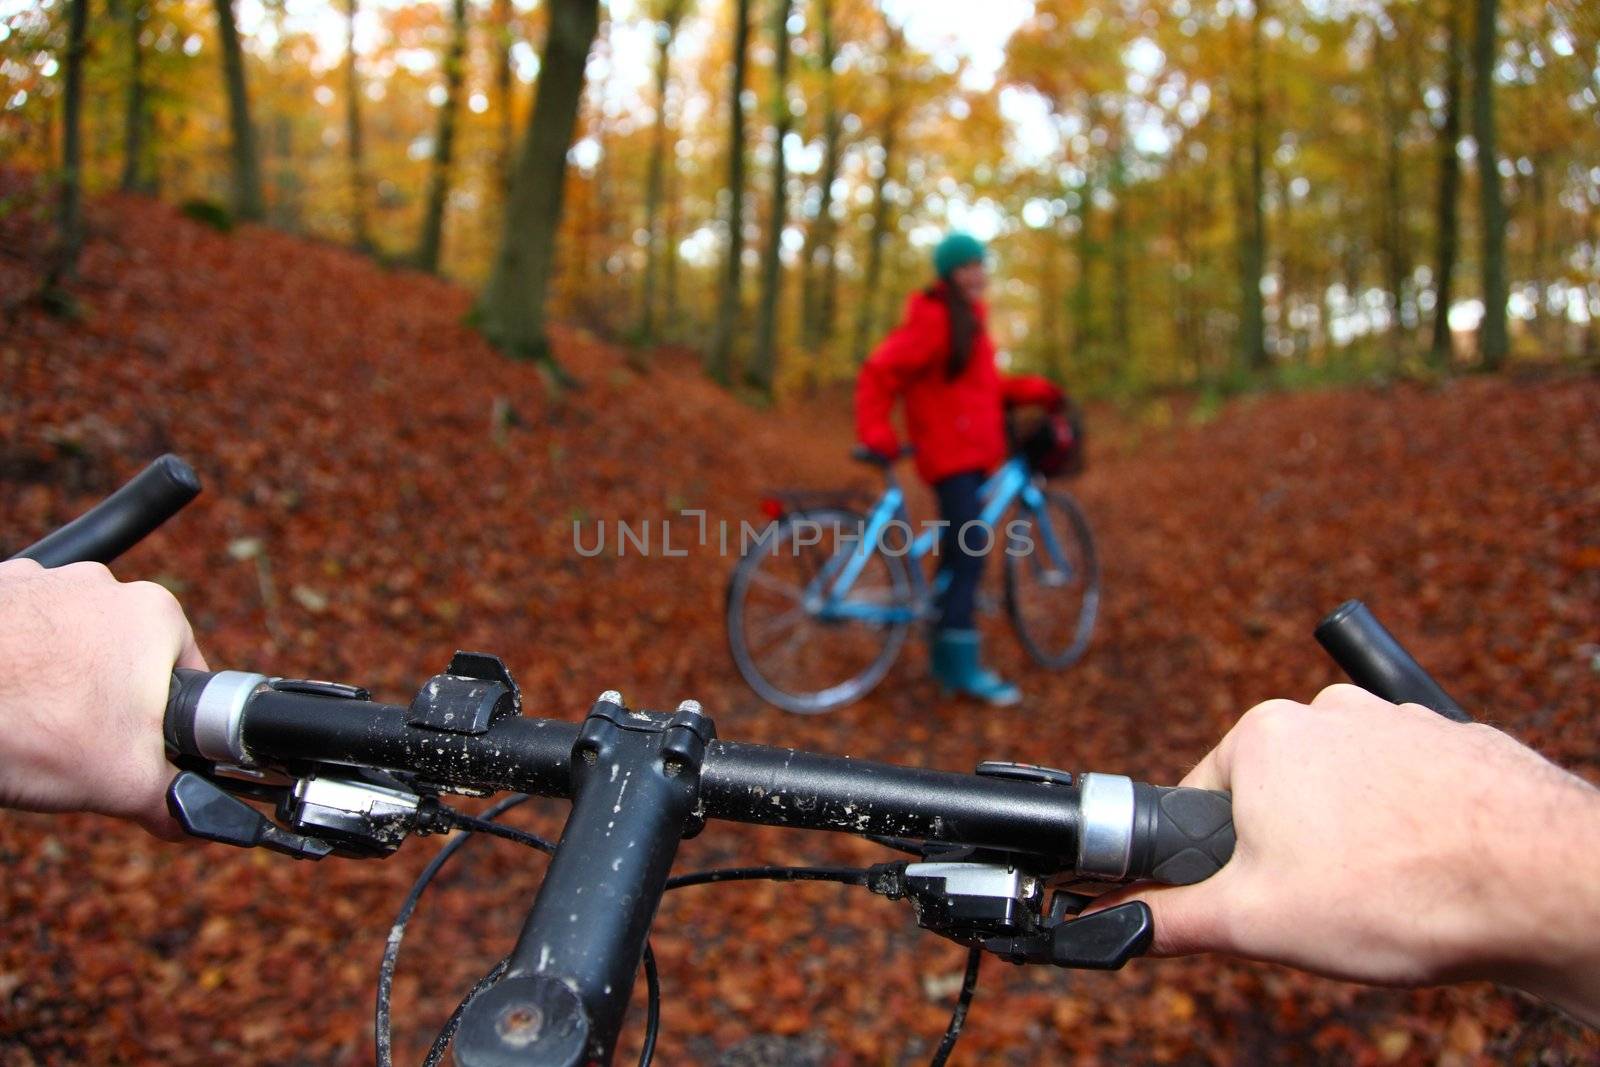 Mountain bike. Biking in the forest, from cyclist perspective. Shallow depth of field, focus on the hands.